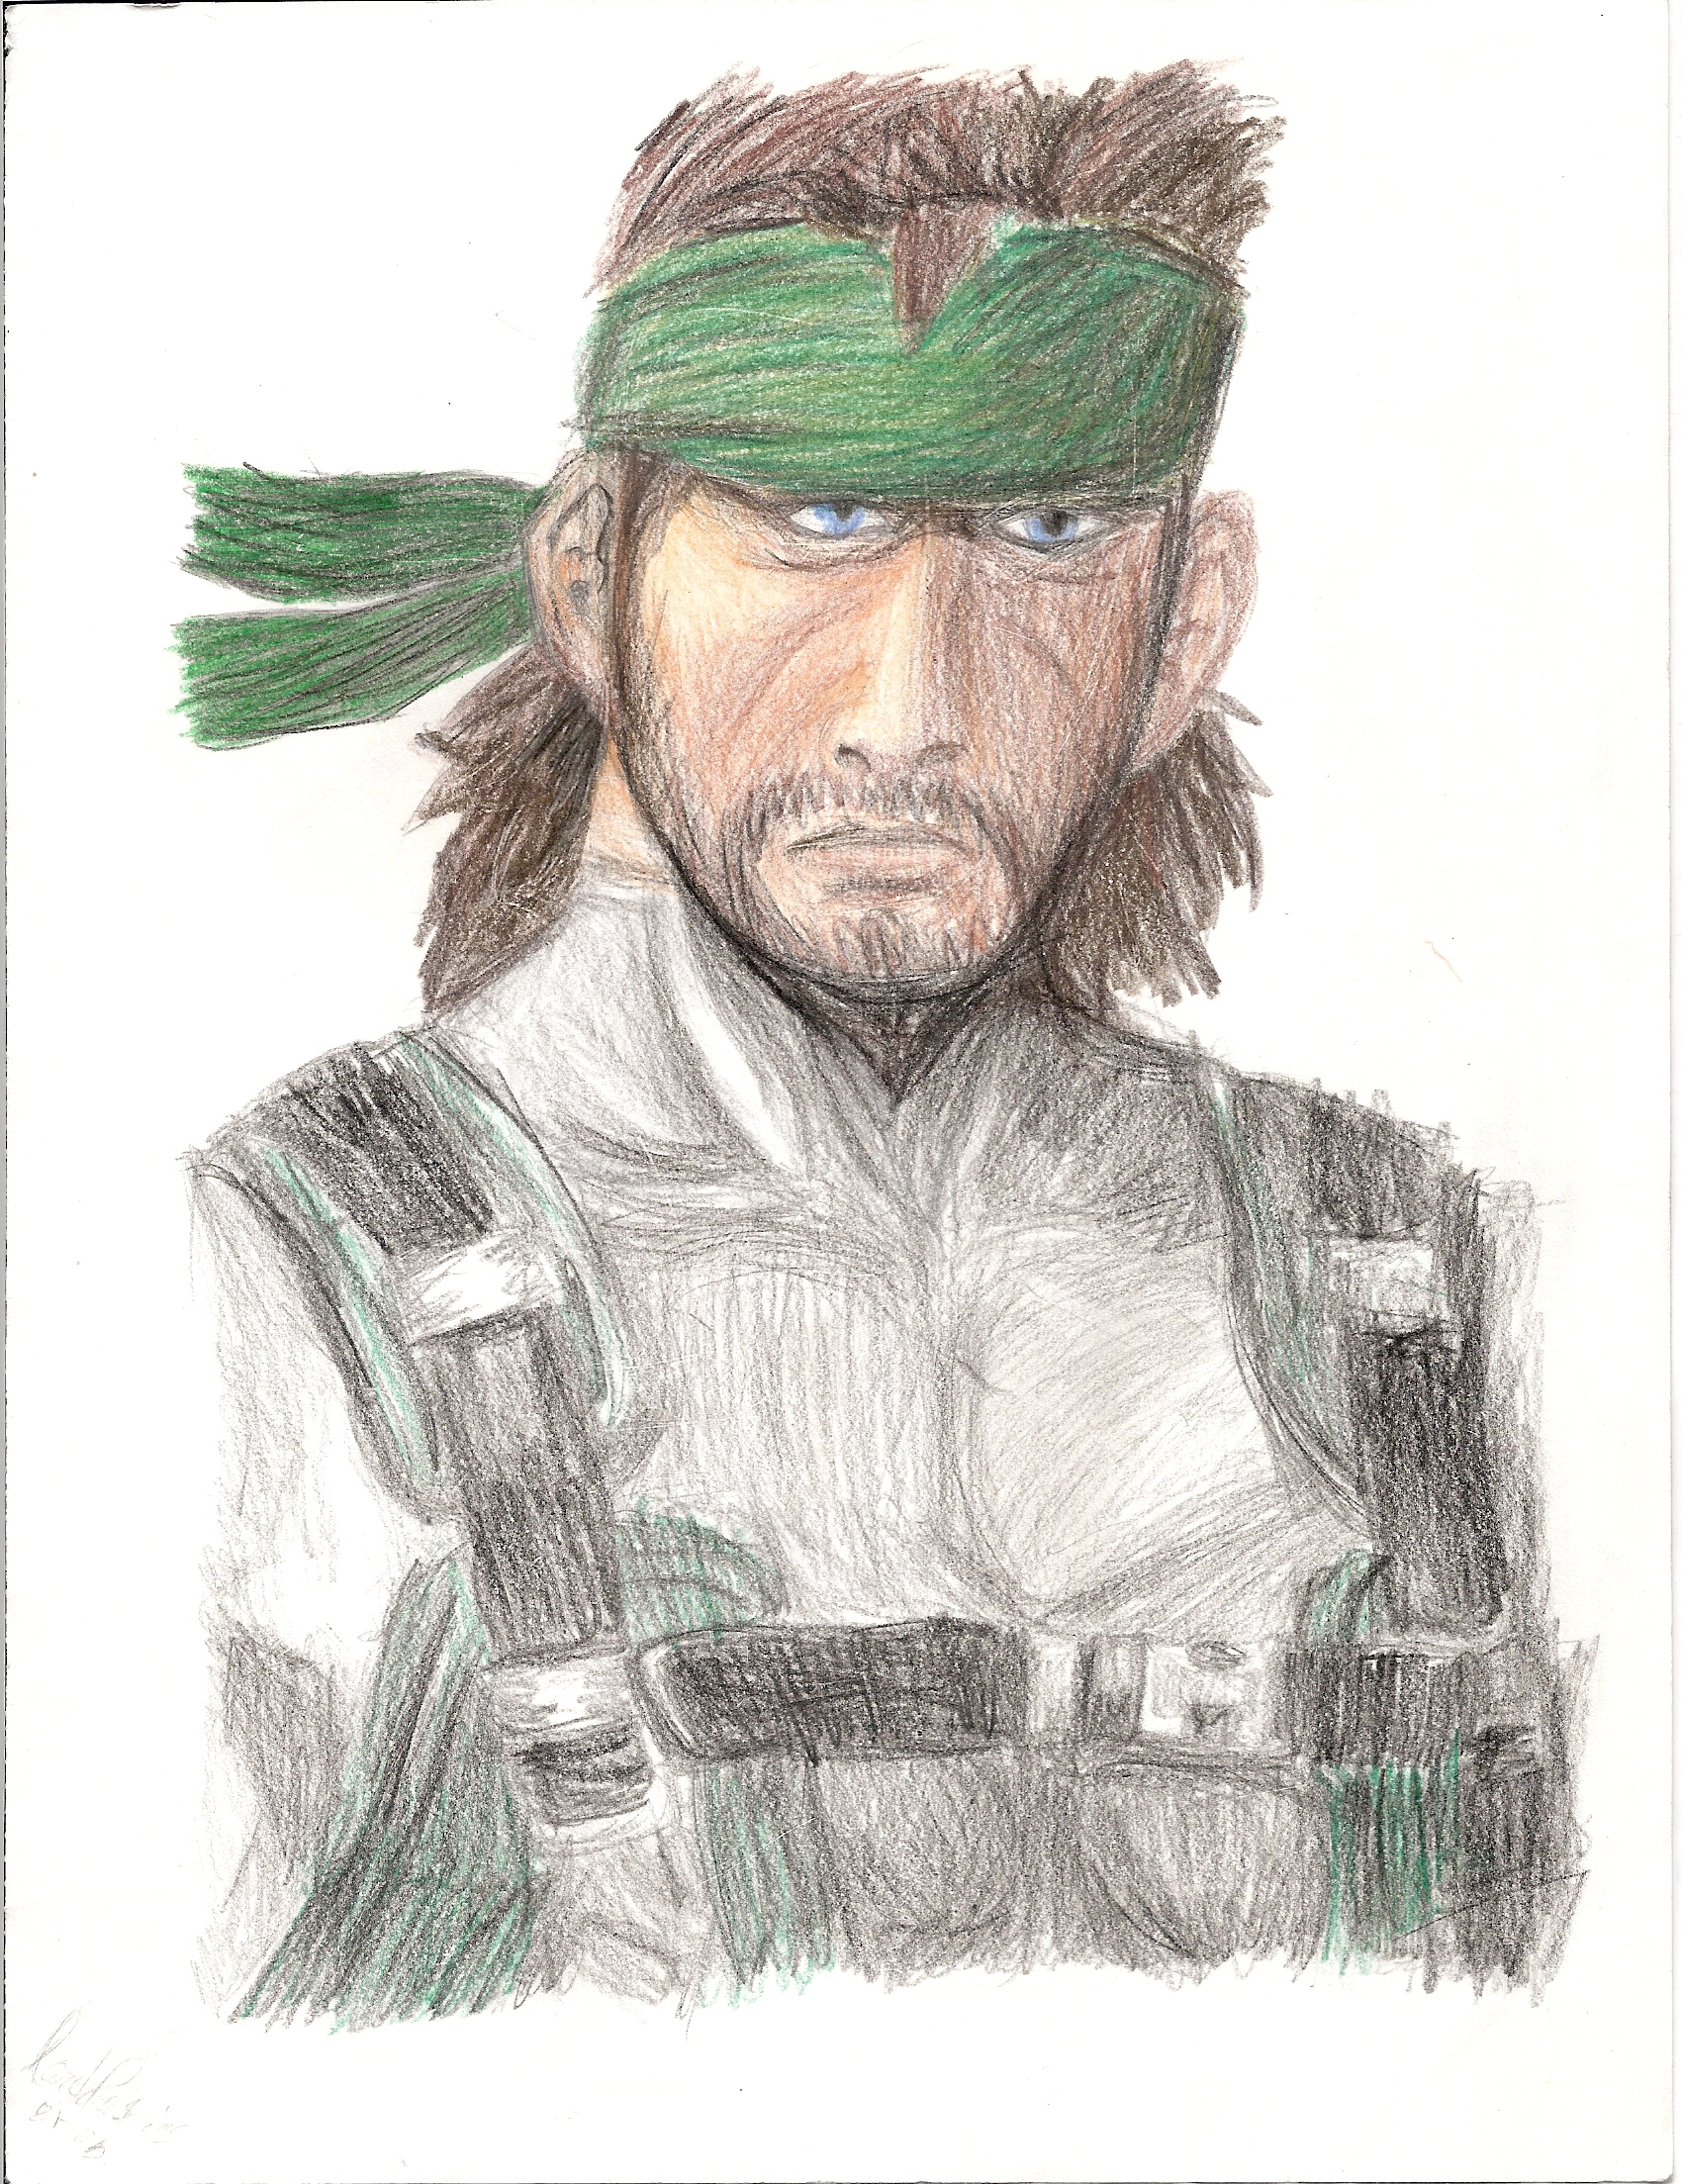 Solid Snake by LordofPastries